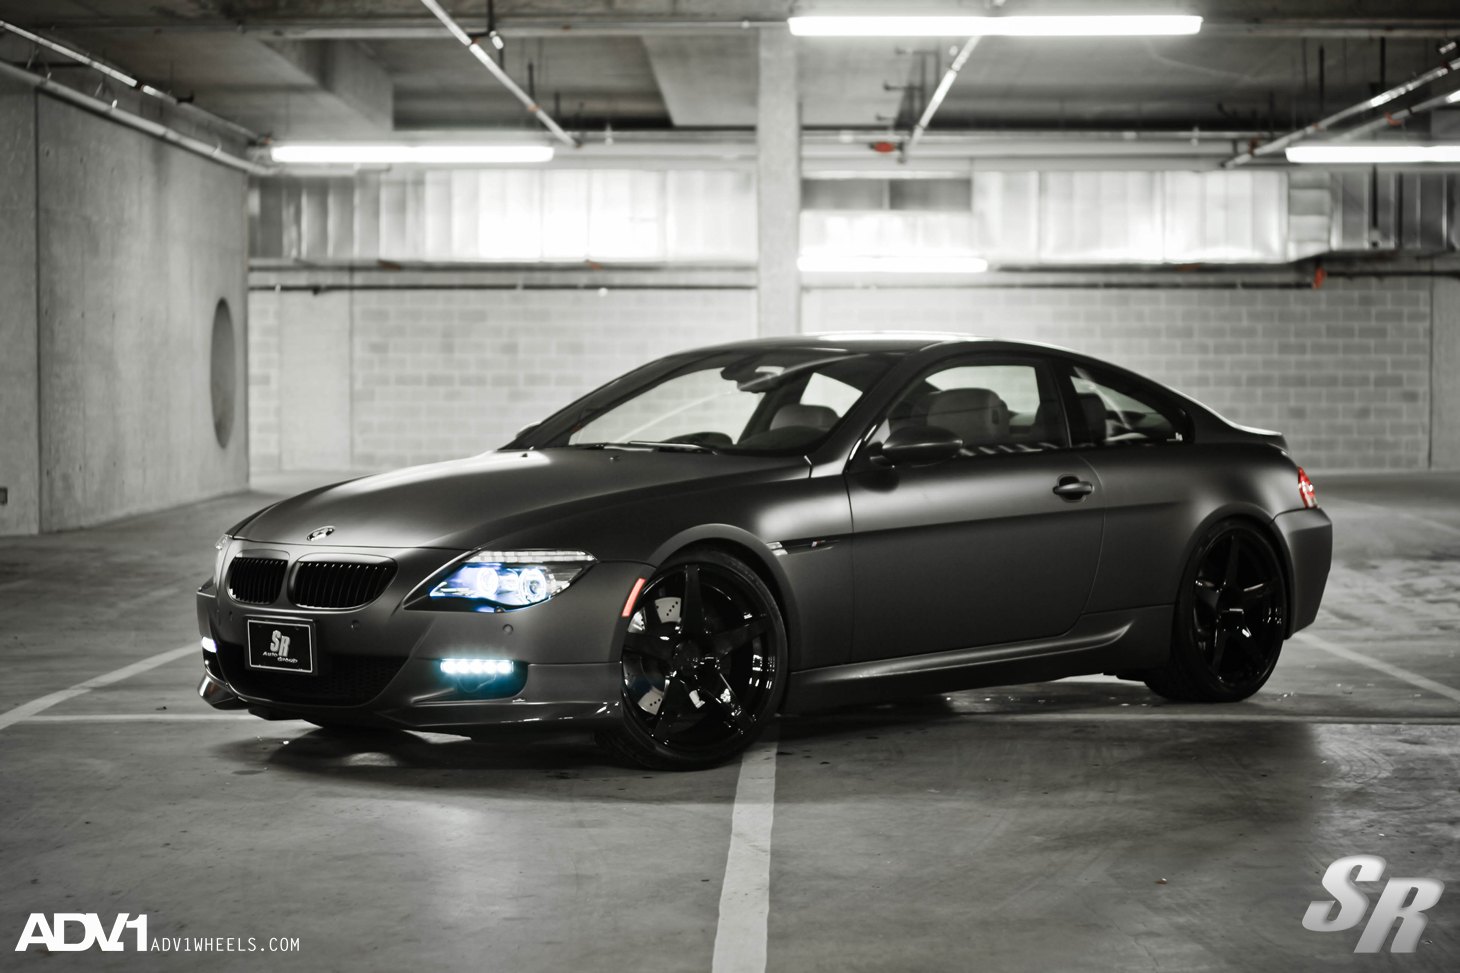 Gray Matte BMW M6 with Aftermarket Front Bumper - Photo by ADV.1